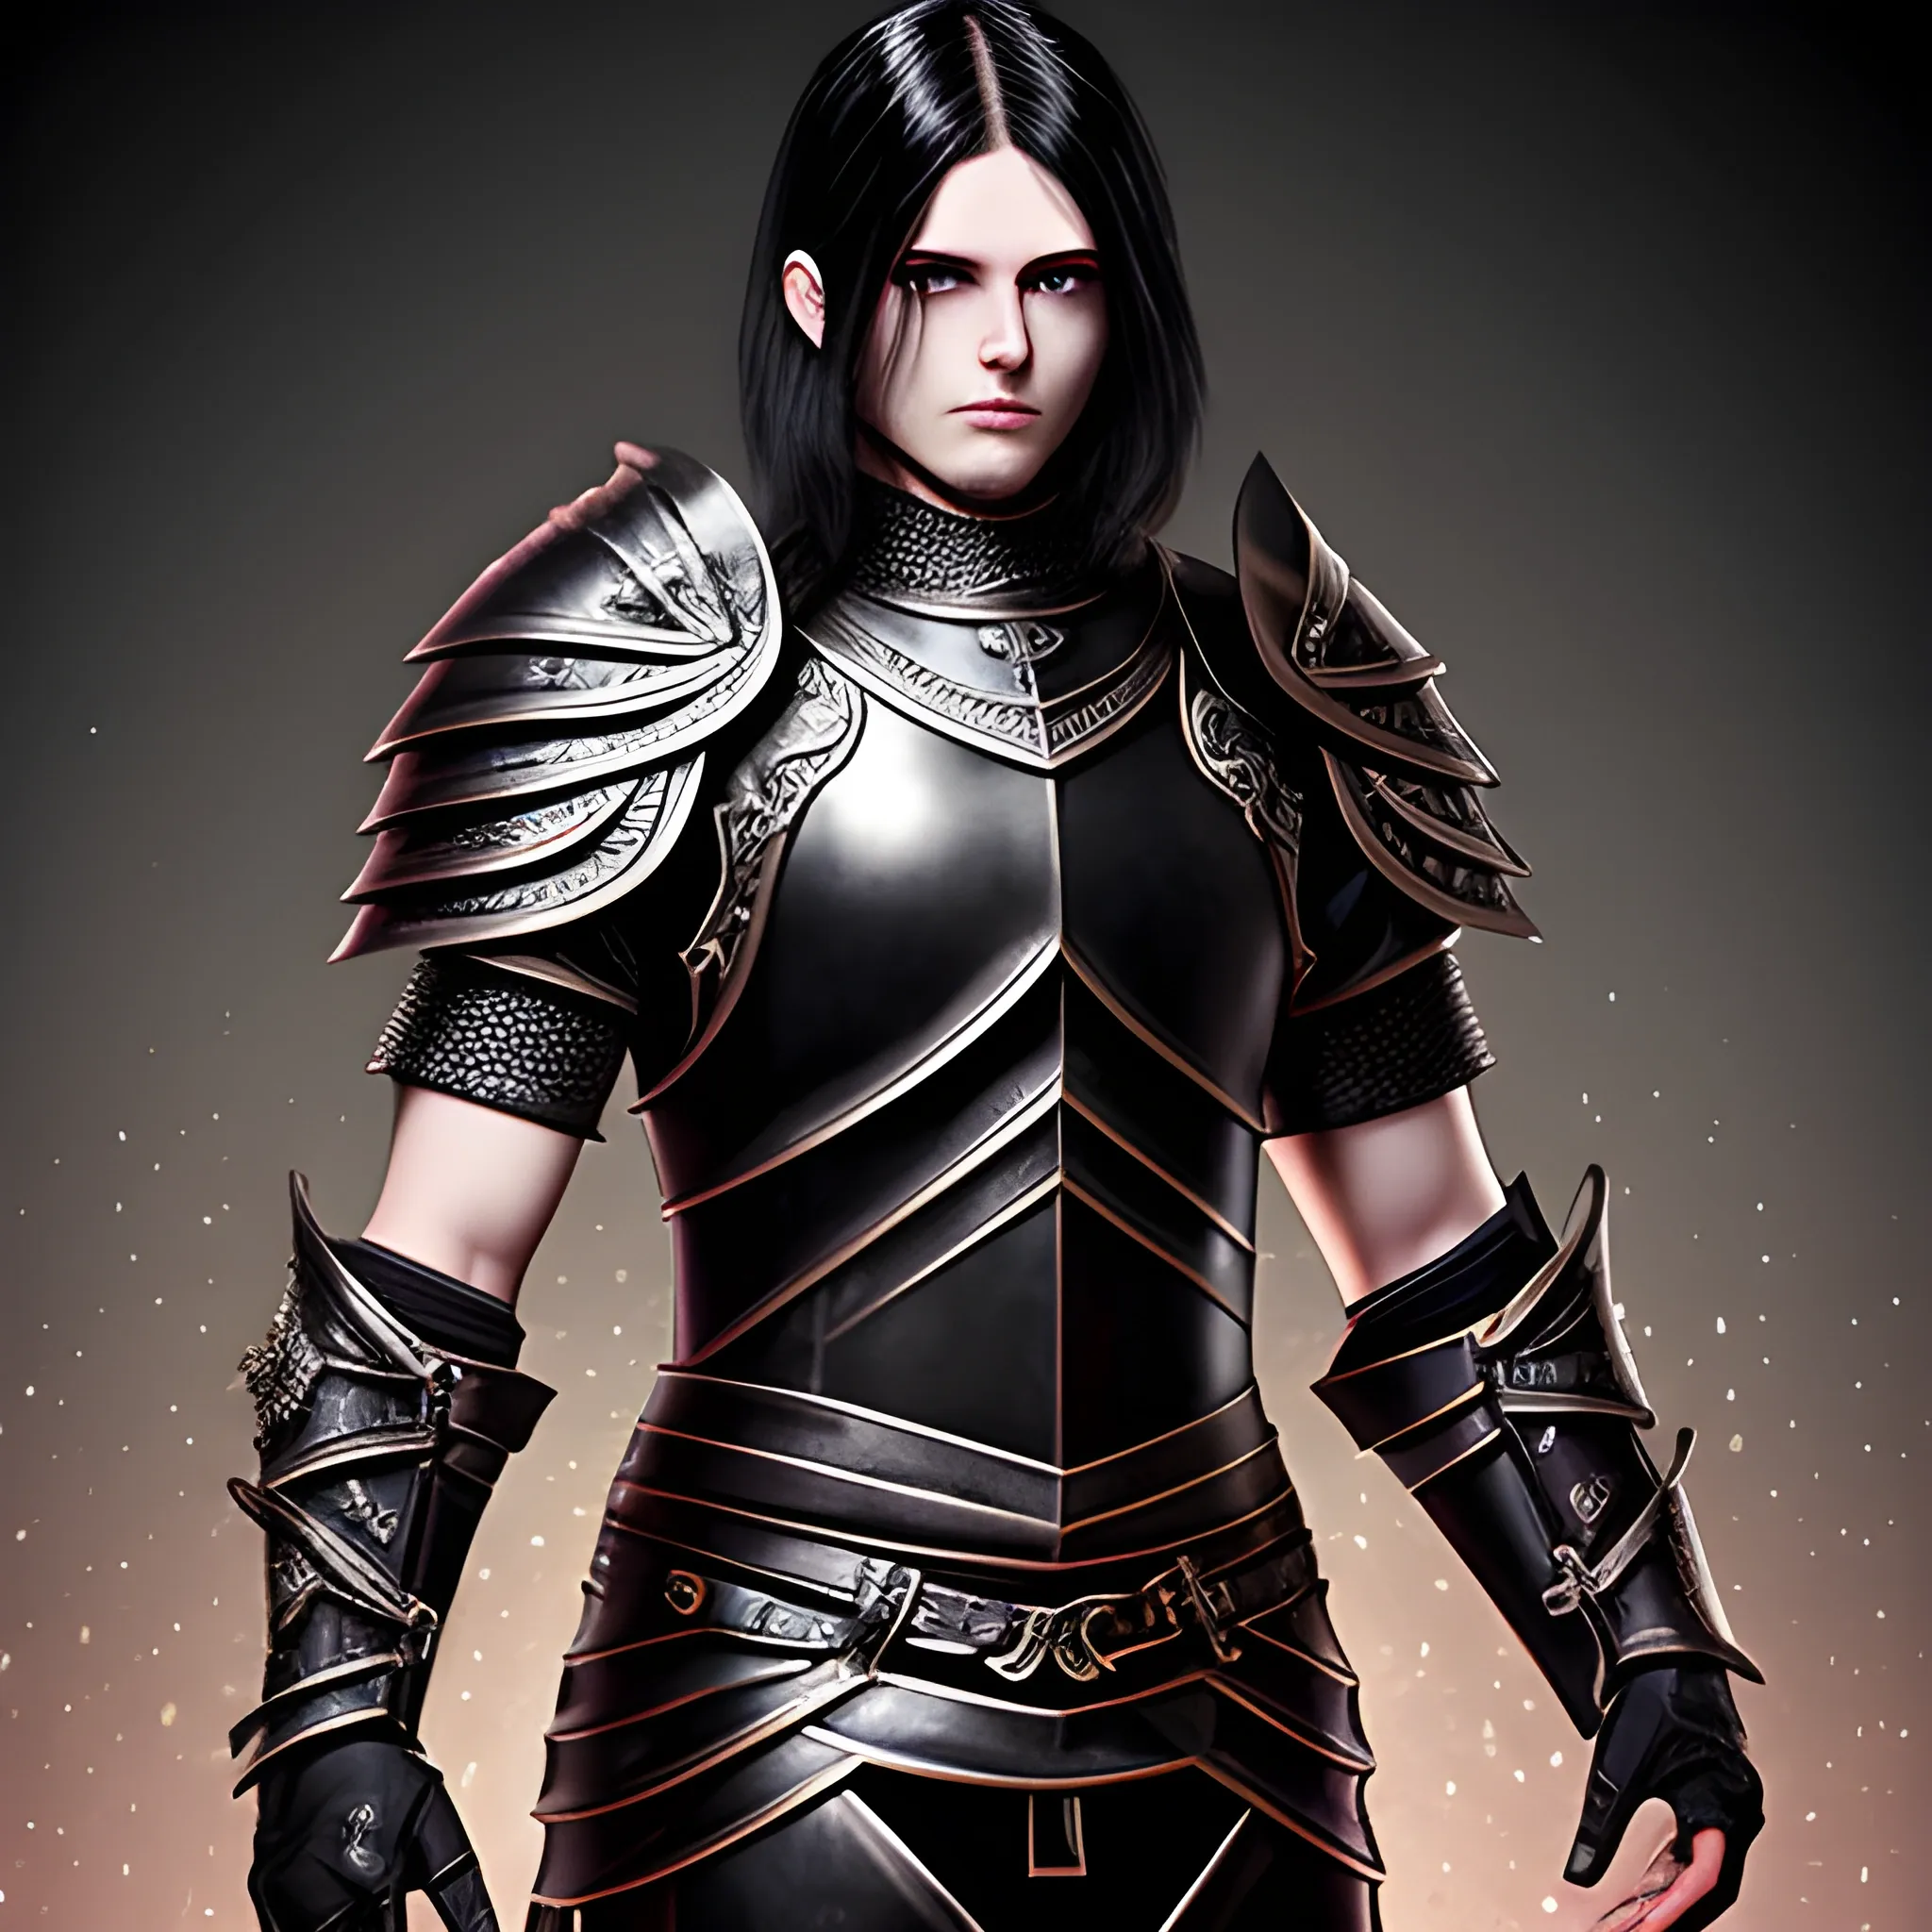 black haired male aasimar in leather armor
, Trippy